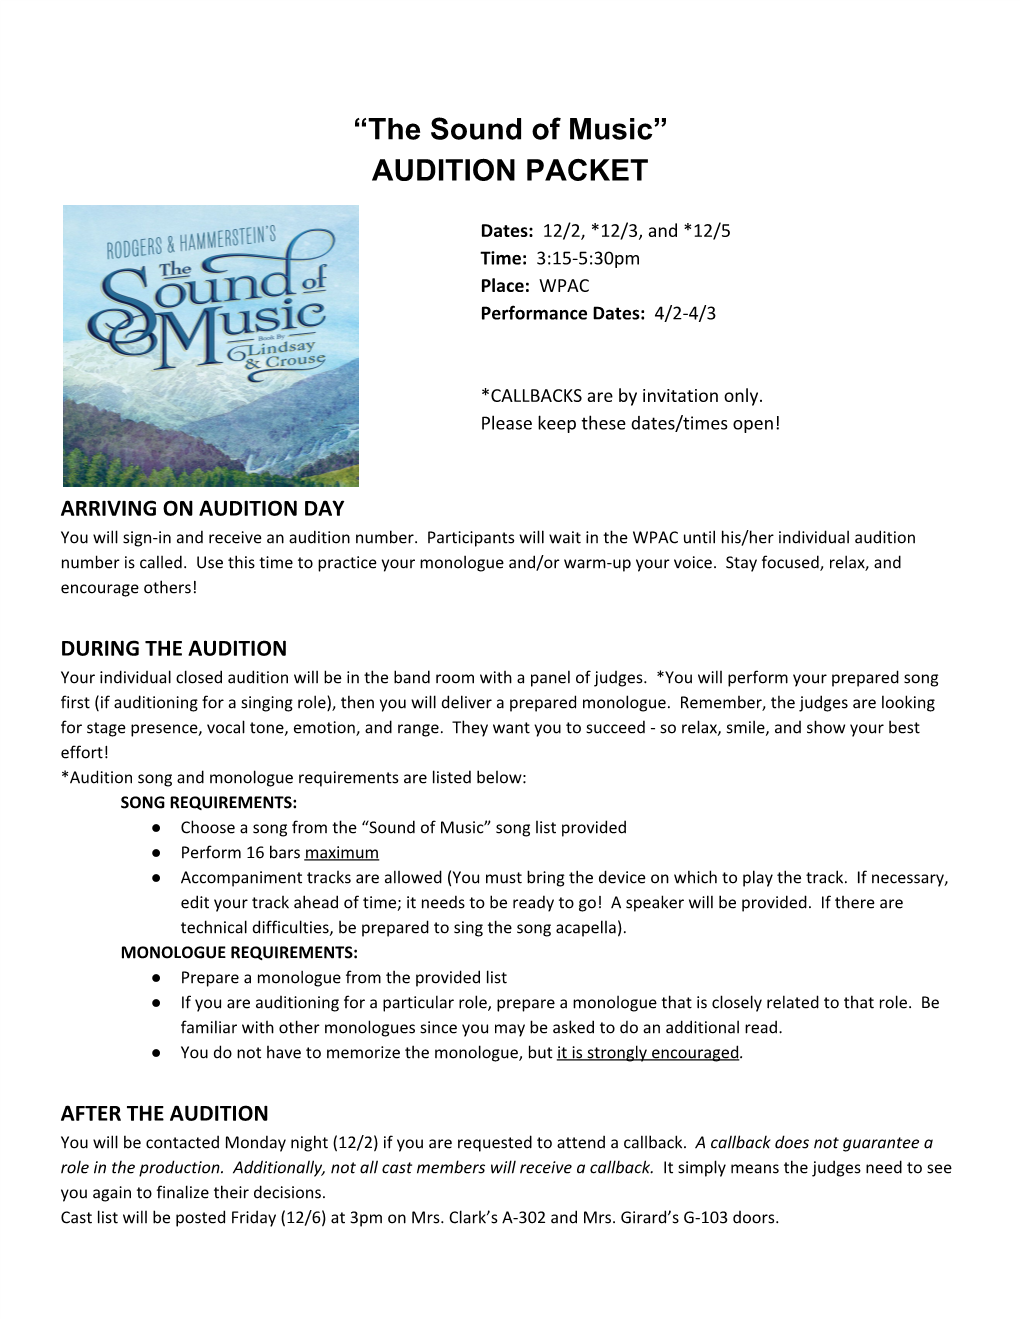 The Sound of Music” AUDITION PACKET